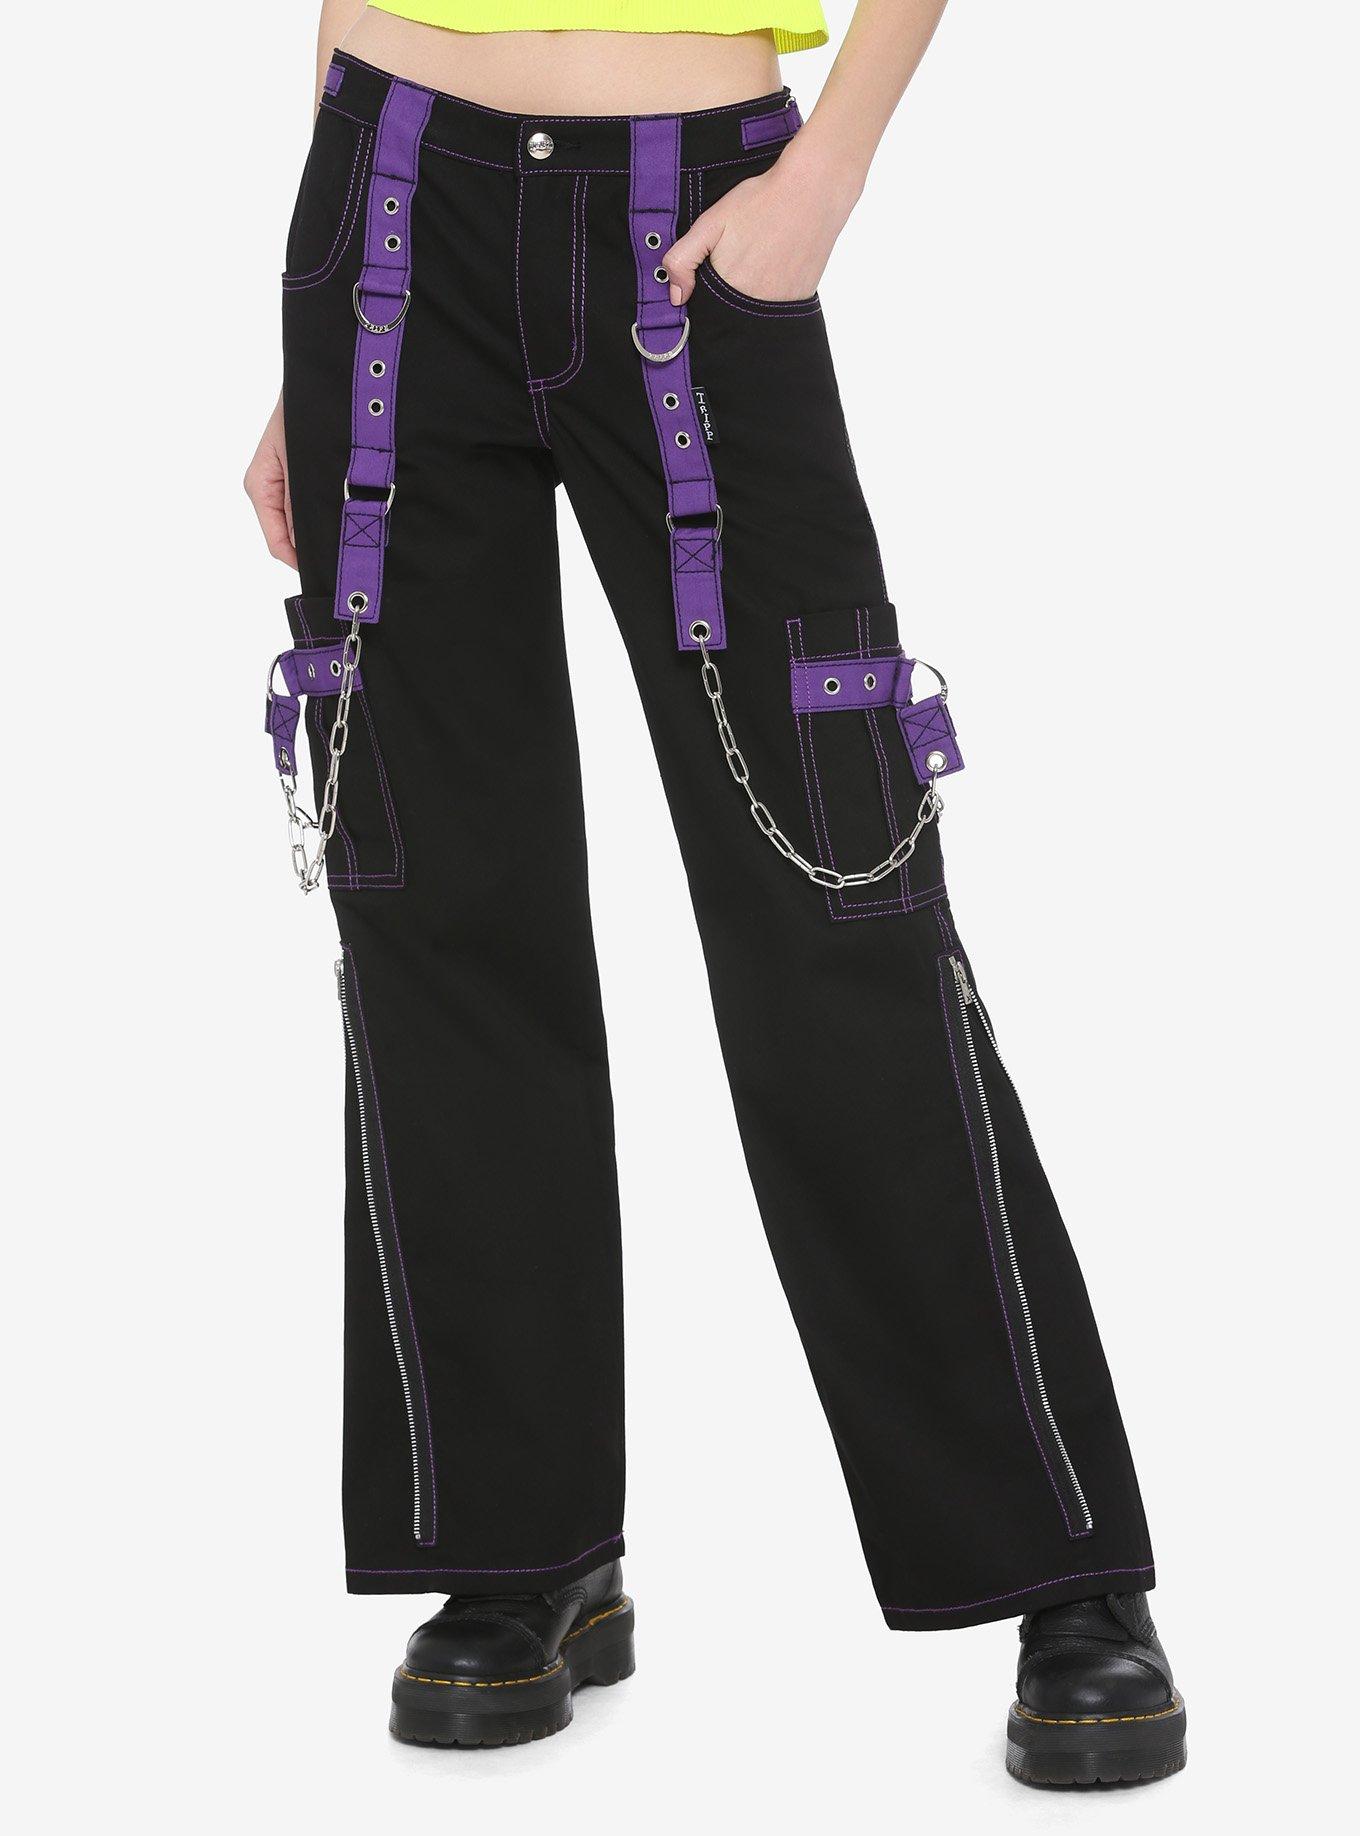 Good deal at Hot Topic's website on Tripp Pants.